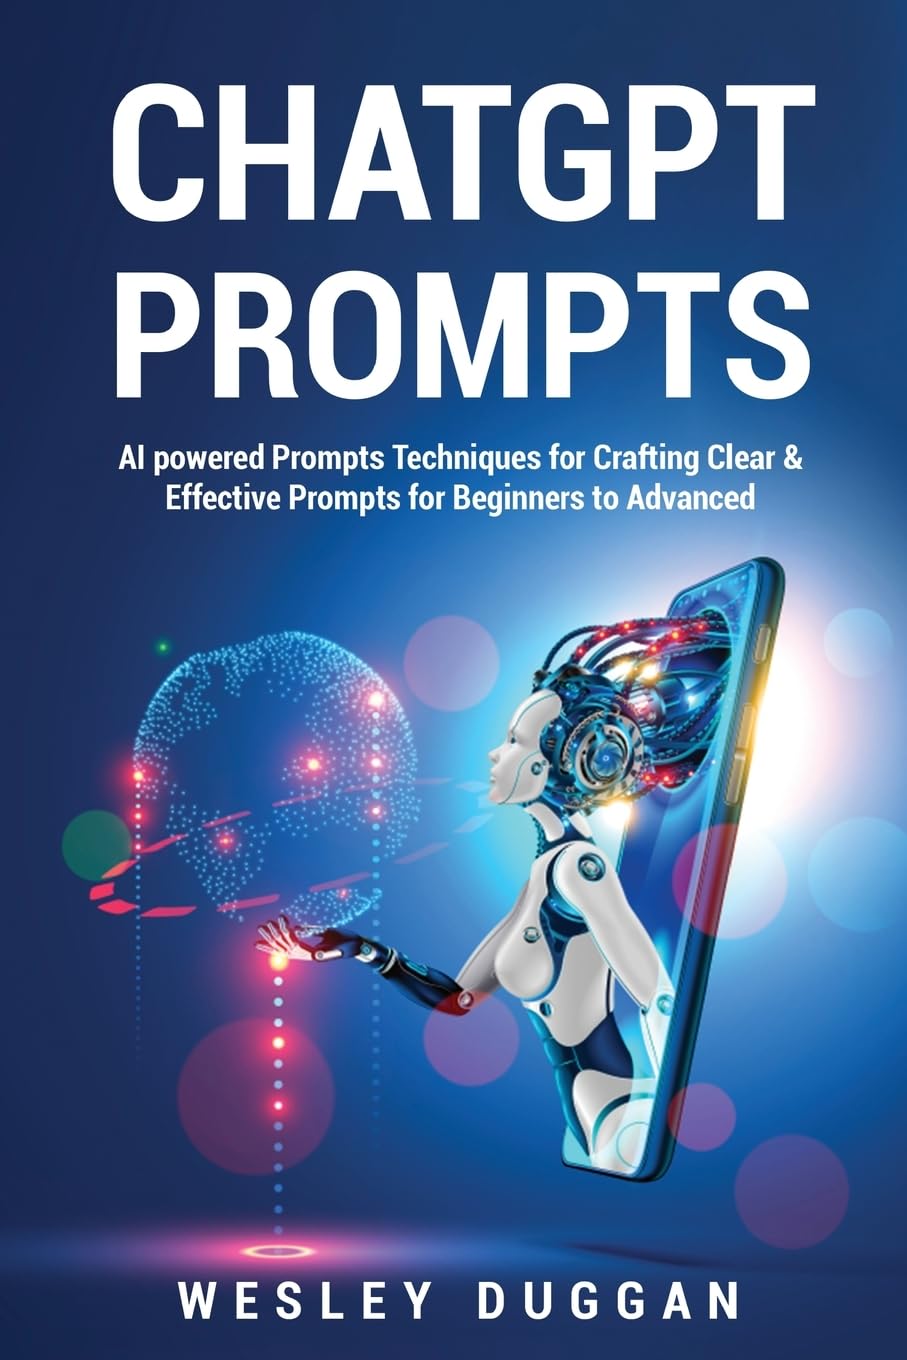 ChatGPT Prompts: AI powered Prompts Techniques for Crafting Clear & Effective Prompts for Beginners to Advanced